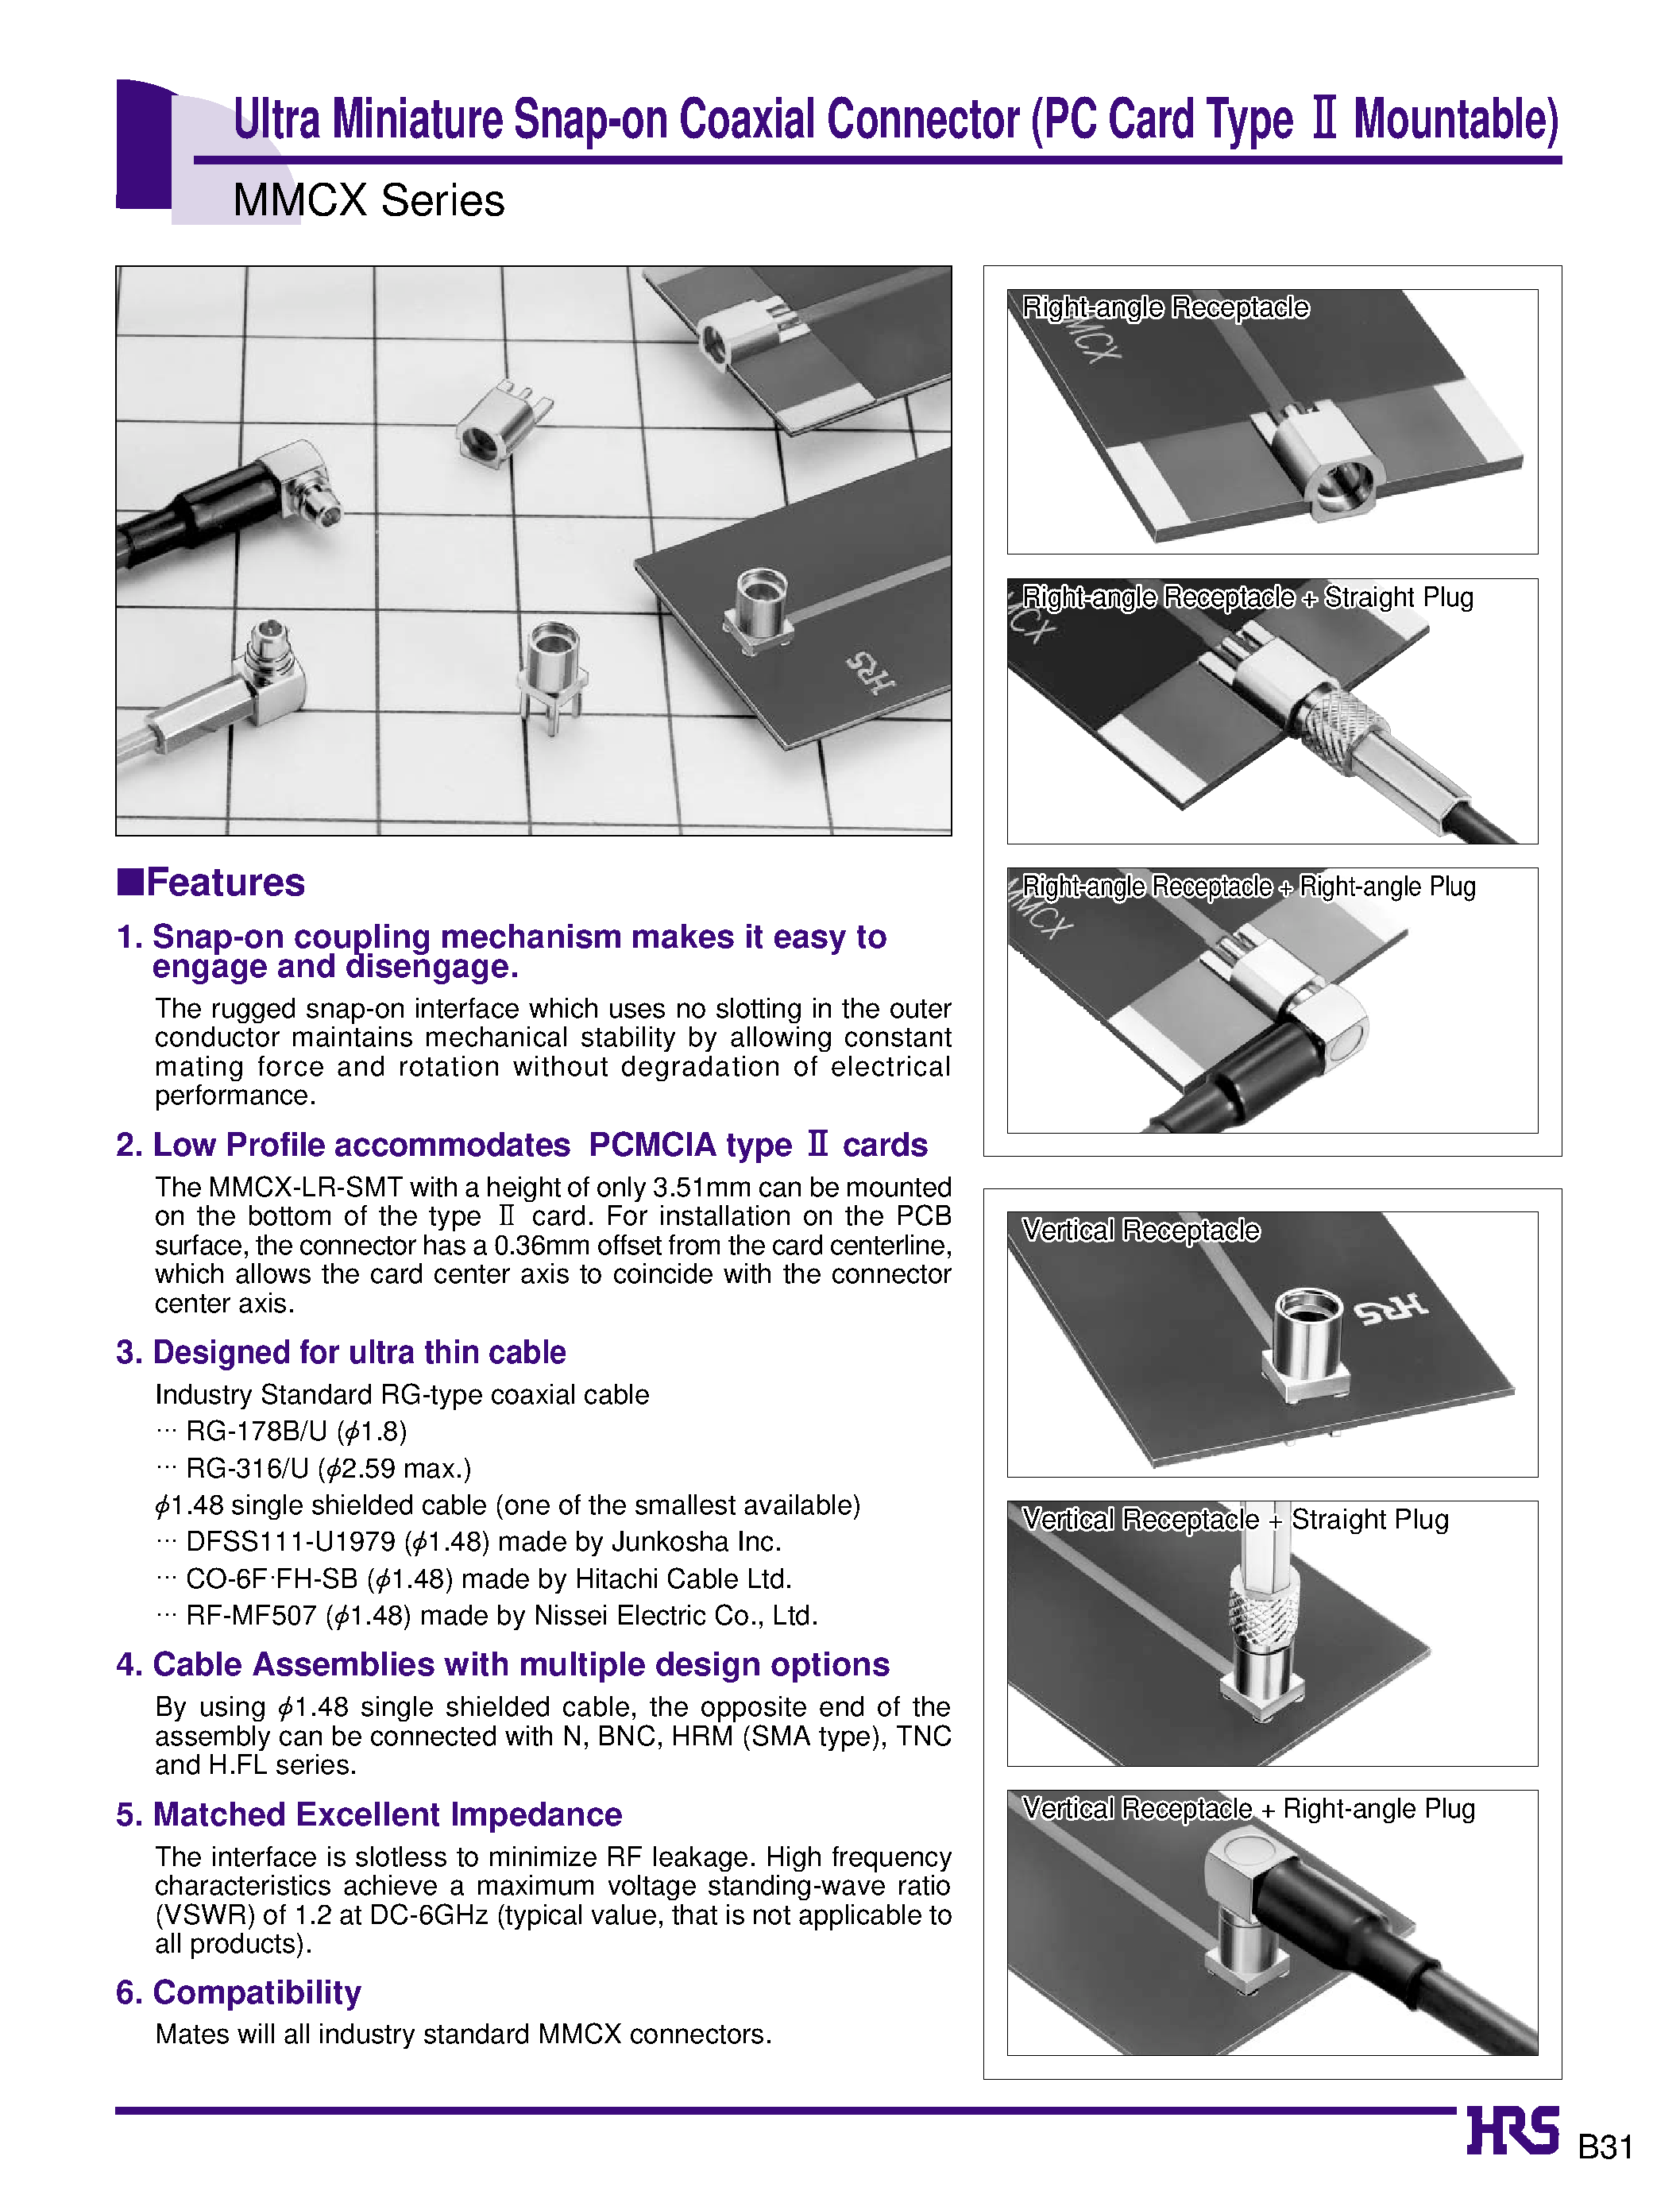 Datasheet MMCX-LP-316/U - Ultra Miniature Snap-on Coaxial Connector (PC Card Type 2 Mountable) page 1